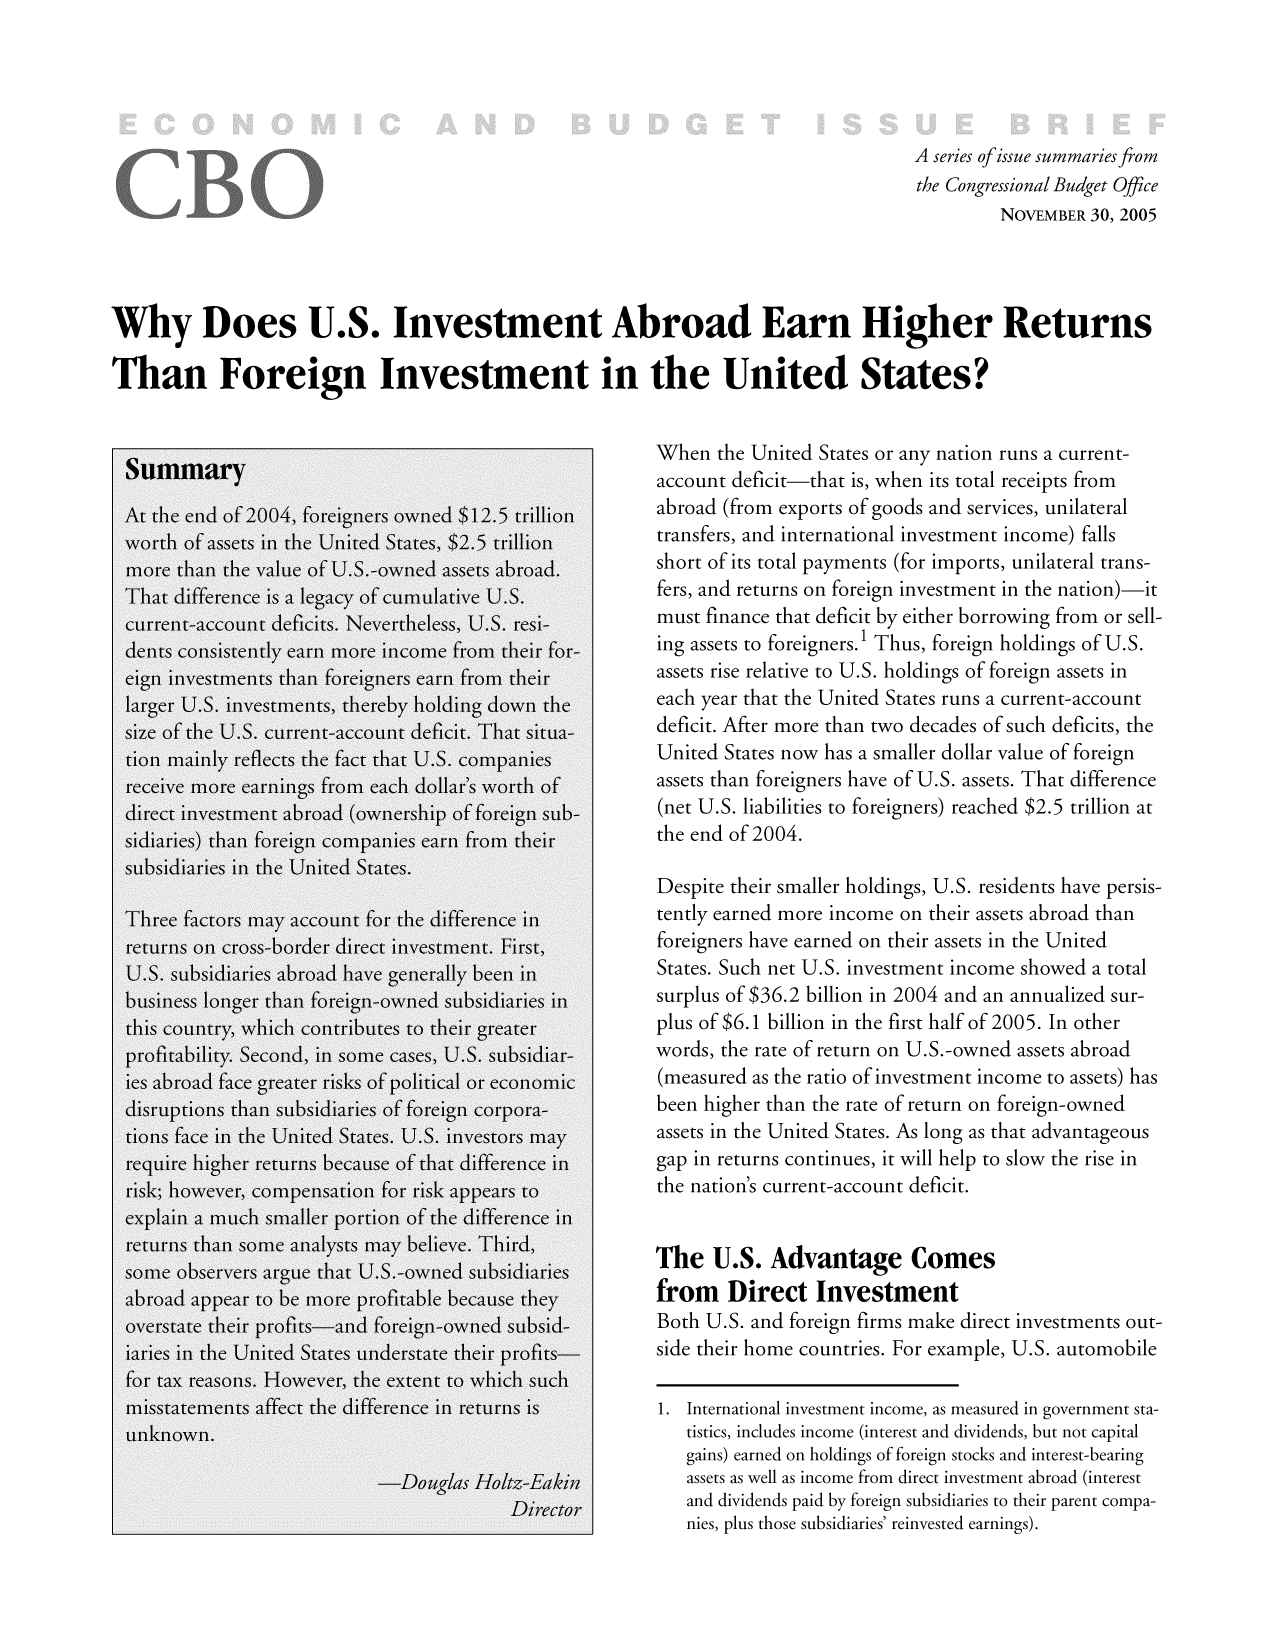 handle is hein.congrec/cbo9479 and id is 1 raw text is: A series ofissue summaries from
the Congressional Budget Office
NOVEMBER 30, 2005
Why Does U.S. Investment Abroad Earn Higher Returns
Than Foreign Investment in the United States?
SummaryWhen the United States or any nation runs a current-
Summaryaccount deficit-that is, when its total receipts from
At the end of 2004, foreigners owned $12.5 trillion  abroad (from exports of goods and services, unilateral
worth of assets in the United States, $2.5 trillion  transfers, and international investment income) falls
more than the value of U.S.-owned assets abroad.    short of its total payments (for imports, unilateral trans-
That difference is a legacy of cumulative U.S.     fers, and returns on foreign investment in the nation)it
current-account deficits. Nevertheless, U.S. resi-  must finance that deficit by either borrowing from or sell-
dents consistently earn more income from their for-  ing assets to foreigners.' Thus, foreign holdings of U.S.
eign investments than foreigners earn from their    assets rise relative to U.S. holdings of foreign assets in
larger U.S. investments, thereby holding down the   each year that the United States runs a current-account
size of the U.S. current-account deficit. That situa-  deficit. After more than two decades of such deficits, the
tion mainly reflects the fact that U.S. companies   United States now has a smaller dollar value of foreign
receive more earnings from each dollar's worth of   assets than foreigners have of U.S. assets. That difference
direct investment abroad (ownership of foreign sub-  (net U.S. liabilities to foreigners) reached $2.5 trillion at
sidiaries) than foreign companies earn from their  the end of 2004.
subsidiaries in the United States.
Despite their smaller holdings, U.S. residents have persis-
Three factors may account for the difference in     tently earned more income on their assets abroad than
returns on cross-border direct investment. First,   foreigners have earned on their assets in the United
U.S. subsidiaries abroad have generally been in     States. Such net U.S. investment income showed a total
business longer than foreign-owned subsidiaries in  surplus of $36.2 billion in 2004 and an annualized sur-
this country, which contributes to their greater    plus of $6.1 billion in the first half of 2005. In other
profitability. Second, in some cases, U.S. subsidiar-  words, the rate of return on U.S.-owned assets abroad
ies abroad face greater risks of political or economic  (measured as the ratio of investment income to assets) has
disruptions than subsidiaries of foreign corpora-   been higher than the rate of return on foreign-owned
tions face in the United States. U.S. investors may  assets in the United States. As long as that advantageous
require higher returns because of that difference in  gap in returns continues, it will help to slow the rise in
risk; however, compensation for risk appears to    the nation's current-account deficit.
explain a much smaller portion of the difference in
returns than some analysts may believe. Third,      The U.S.                 Comes
some observers argue that U.S.-owned subsidiariesAdatg
abroad appear to be more profitable because they    fo       ietIvsm           n
overstate their profits-and foreign-owned subsid-   Bt    ..adfrinfrsmk           ietivsmnsot
iaries in the United States understate their profits-sietirhmconis.FrxapUS.uoobl
for tax reasons. However, the extent to which such
misstatements affect the difference in returns is1.Jtrtinlnvtmtinmamaurdn                 vrmntt-
unknown.titcicueinoe(neetaddvdnsbunocptl
-Douglas Holtz-Ea kin         ast swl sicm     rmdrc netetara itrs
Directoraon diinds  ais, foen bidis totreeirpats rompa
trnsies, plus thoesbirninal rinvestedeanins).fll


